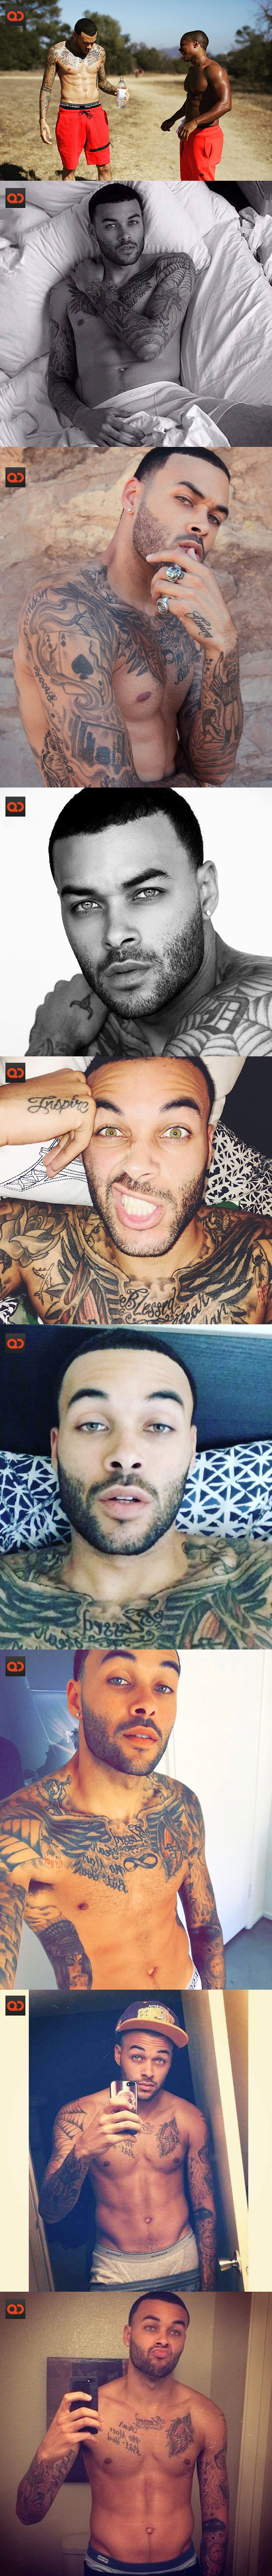 Don Benjamin, From ANTM And Ariana Grande's Music Video “Into You”, Completely Naked In Leaked Selfies!